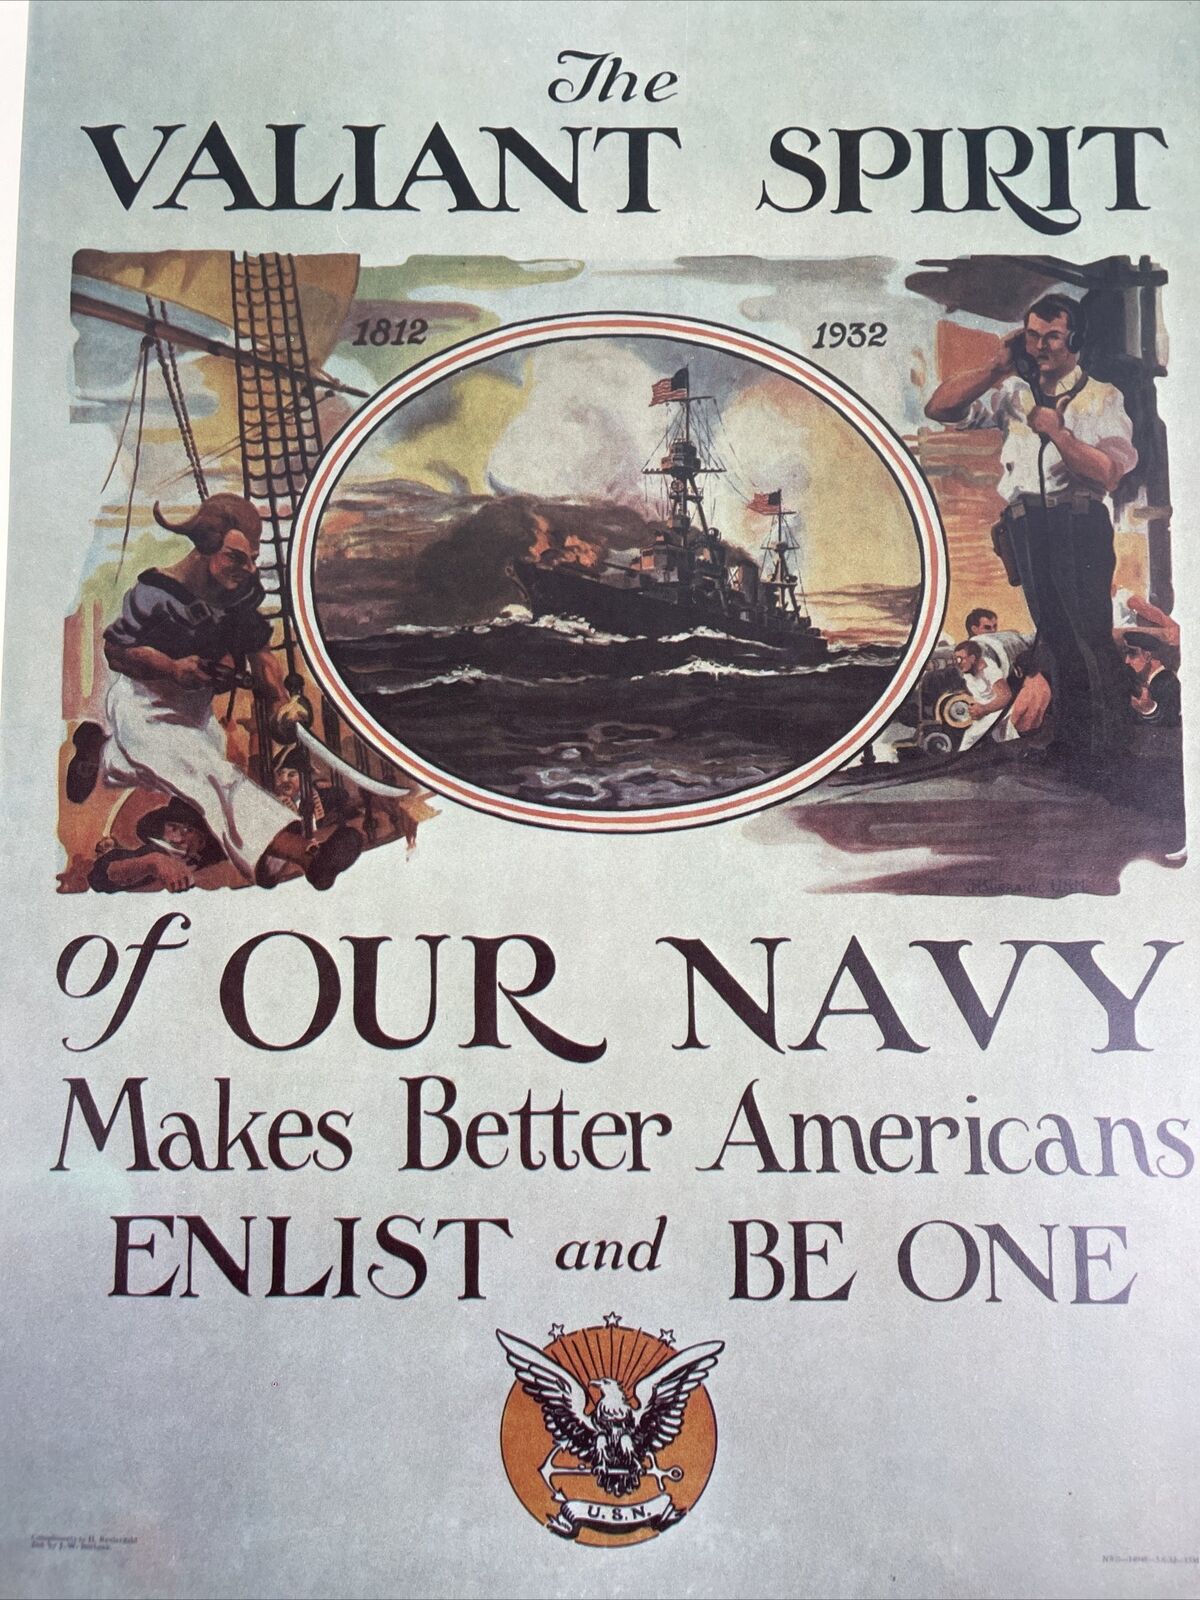 THE VALIANT SPIRIT OF OUR NAVY 20"X 16" Enlistment Poster ( 1932 pre-WWII ) REPO Без бренда - фотография #3